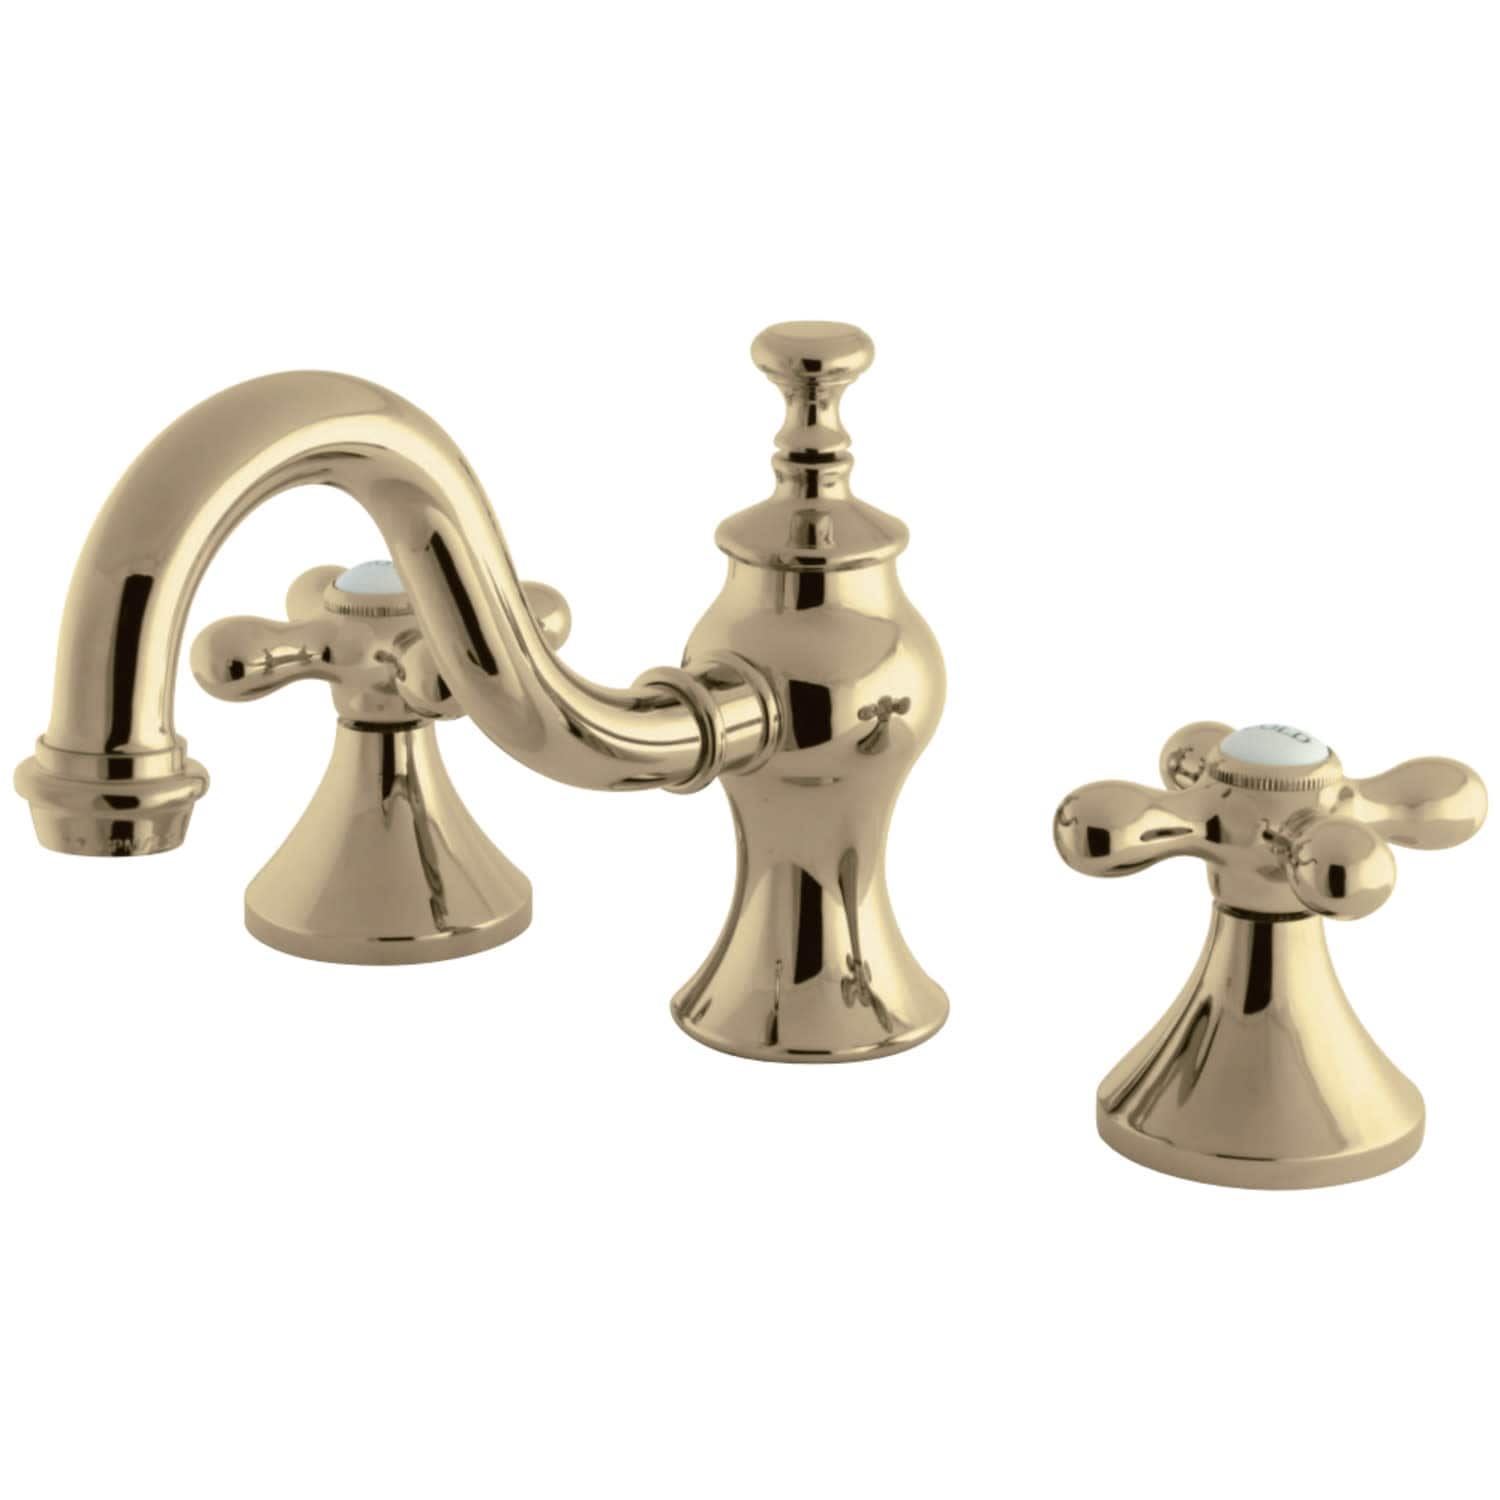 Kingston Brass Governor 3-Pc. Bathroom Accessories Set in Brushed Nickel